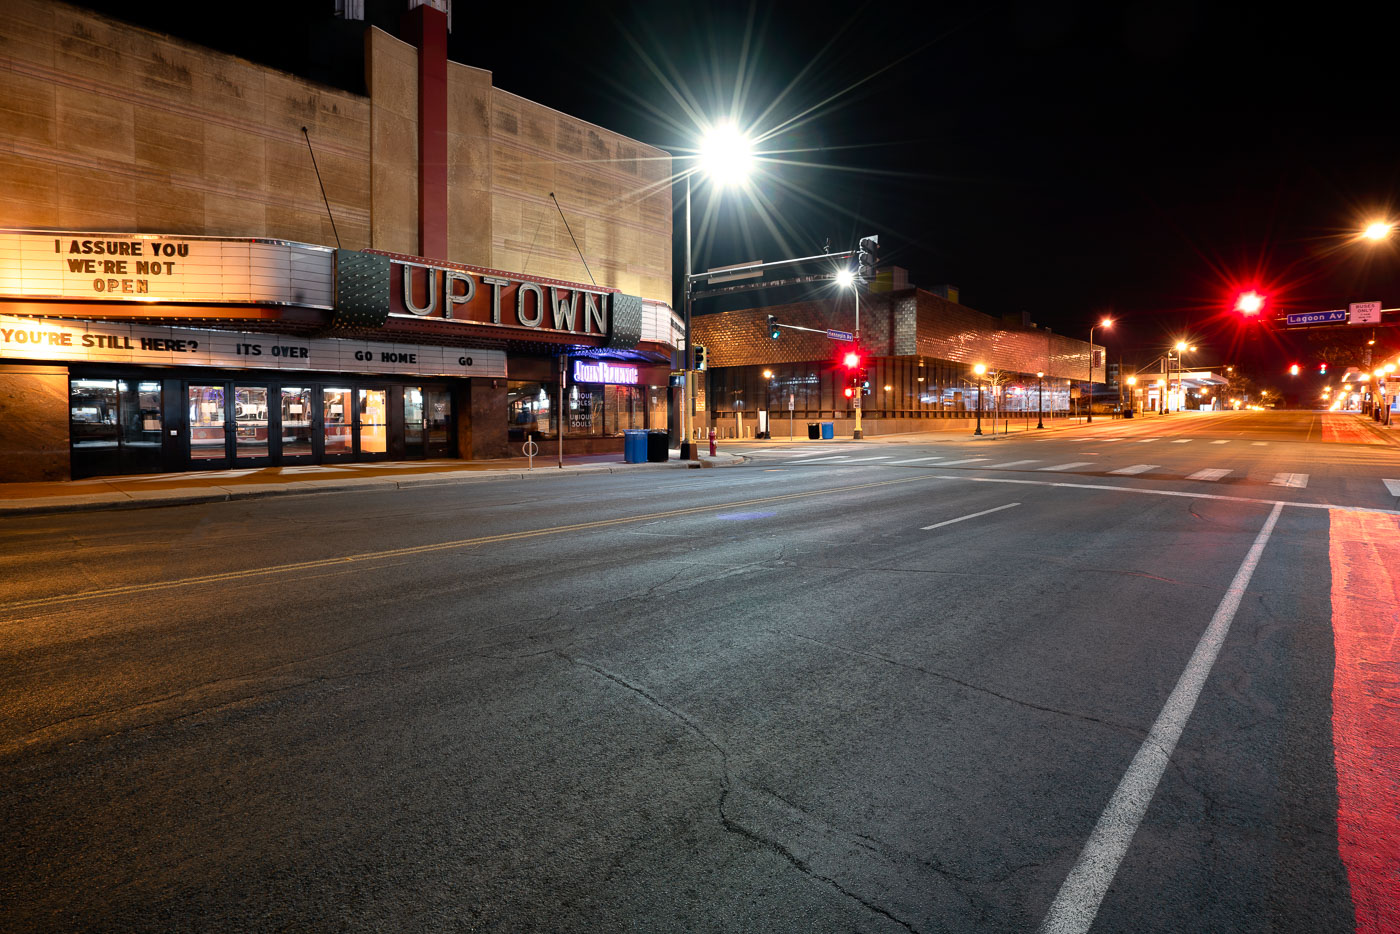 Uptown Theater during covid shutdowns